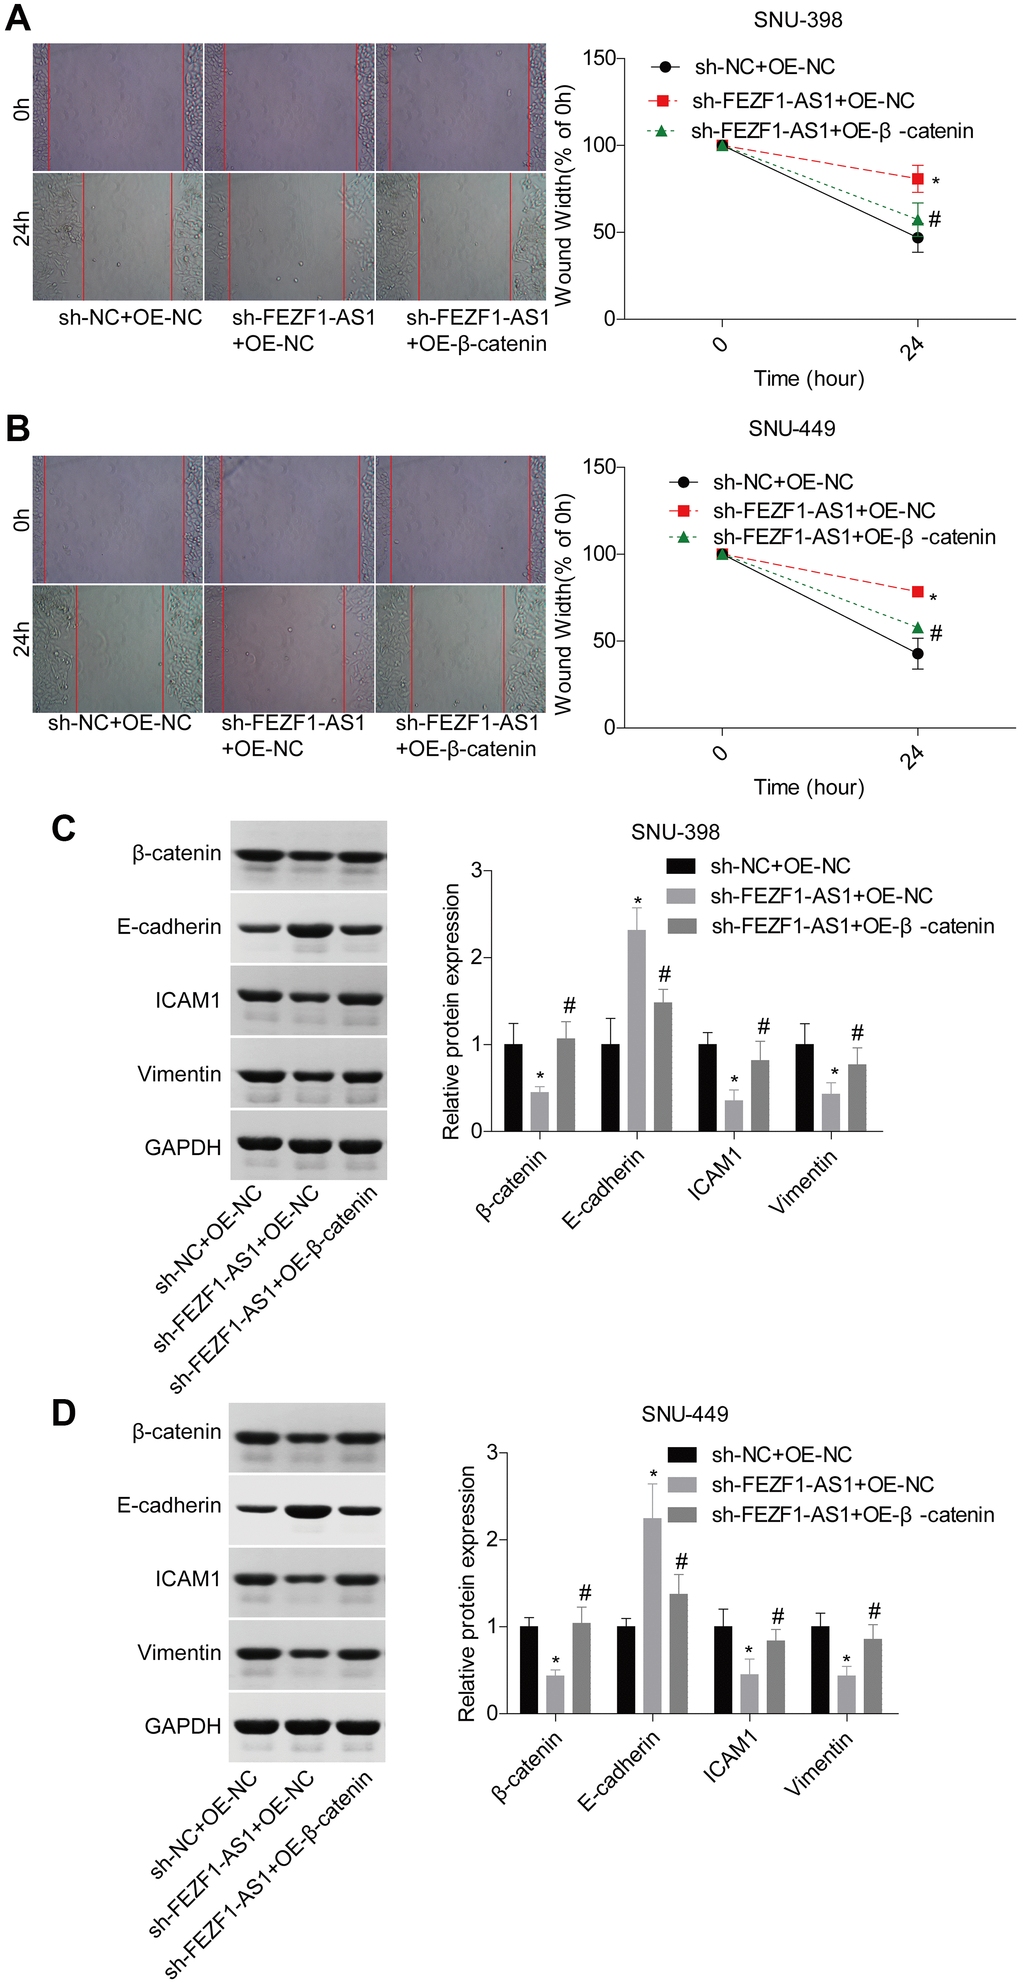 Downregulation of FEZF1-AS1 inhibited the migration and EMT of HCC cells by targeting miR-107/Wnt/β-catenin axis. SNU-398 and SNU-449 cells were divided into three groups, sh-NC + OE-NC, sh–FEZF1-AS1 + OE-NC, and sh–FEZF1-AS1 + OE-β-catenin and submitted to the following assays. (A–B) Cell migration was detected by using the wound healing assay, *P #P C–D) The expression of EMT markers (E-cadherin, ICAM1 and Vimentin) were measured by western blot, sh-FEZF1-AS1 group vs sh-NC group, *P #P 